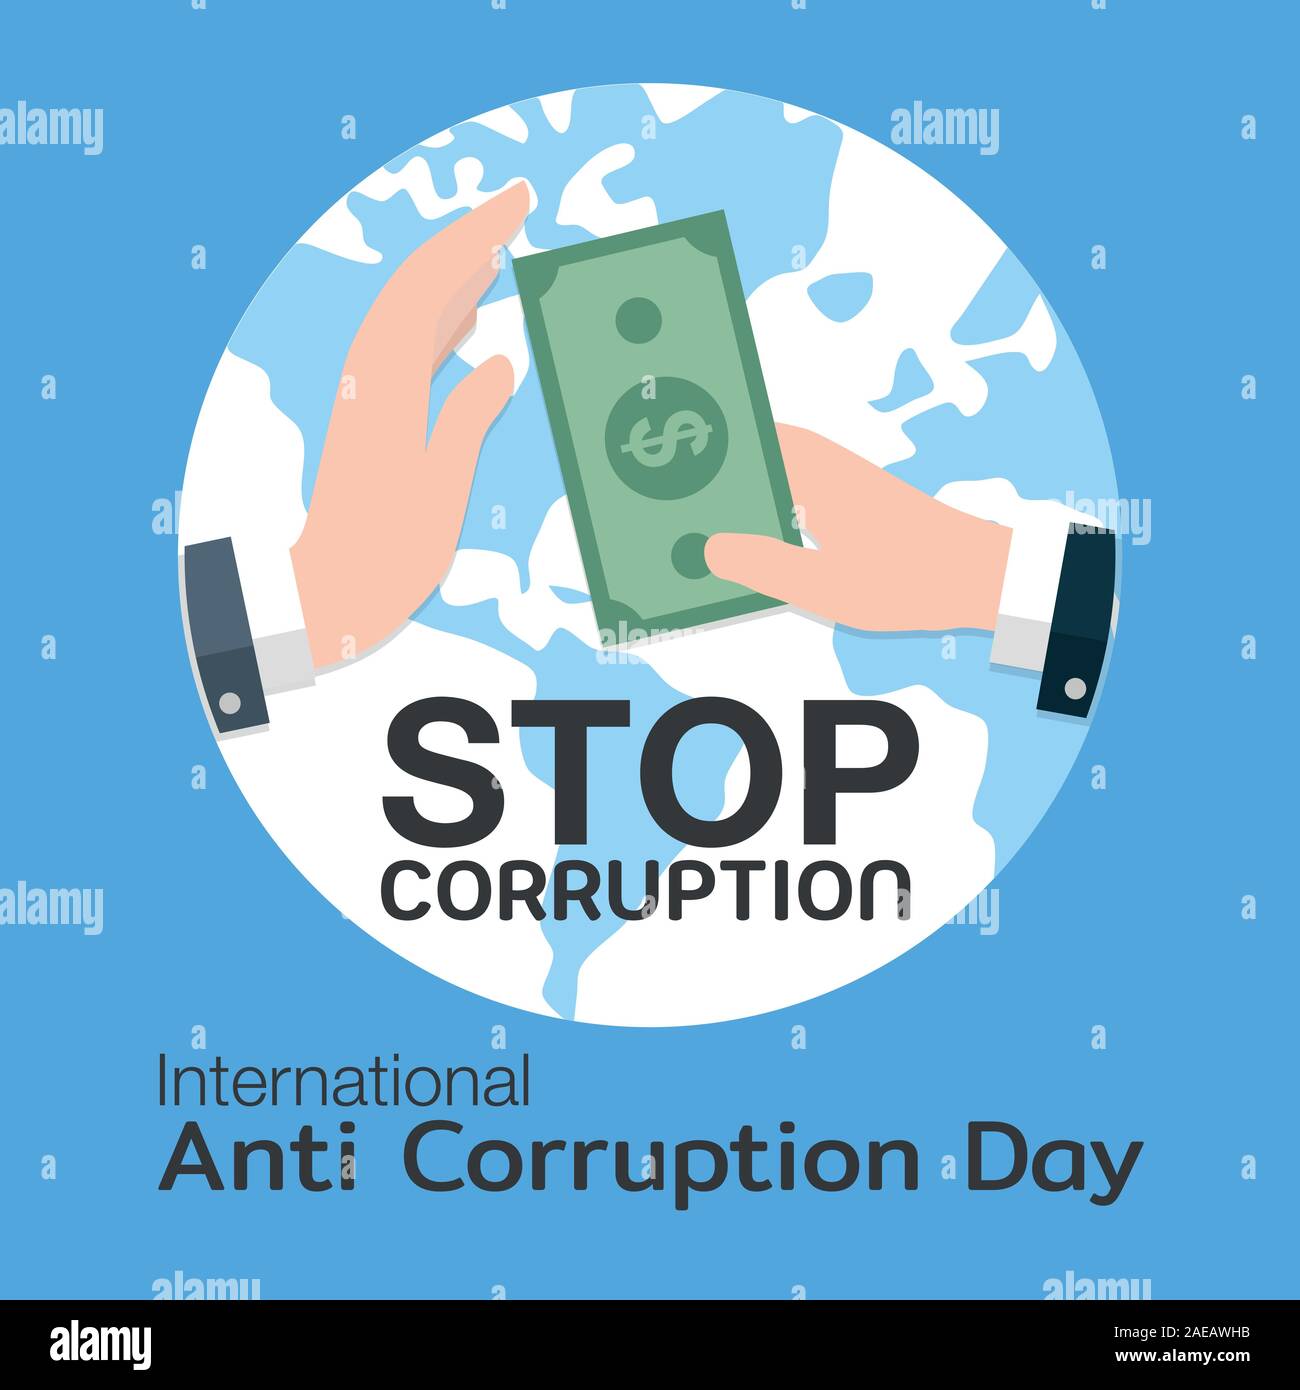 International Anti-Corruption Day for banner or poster - vector Illustration Stock Vector